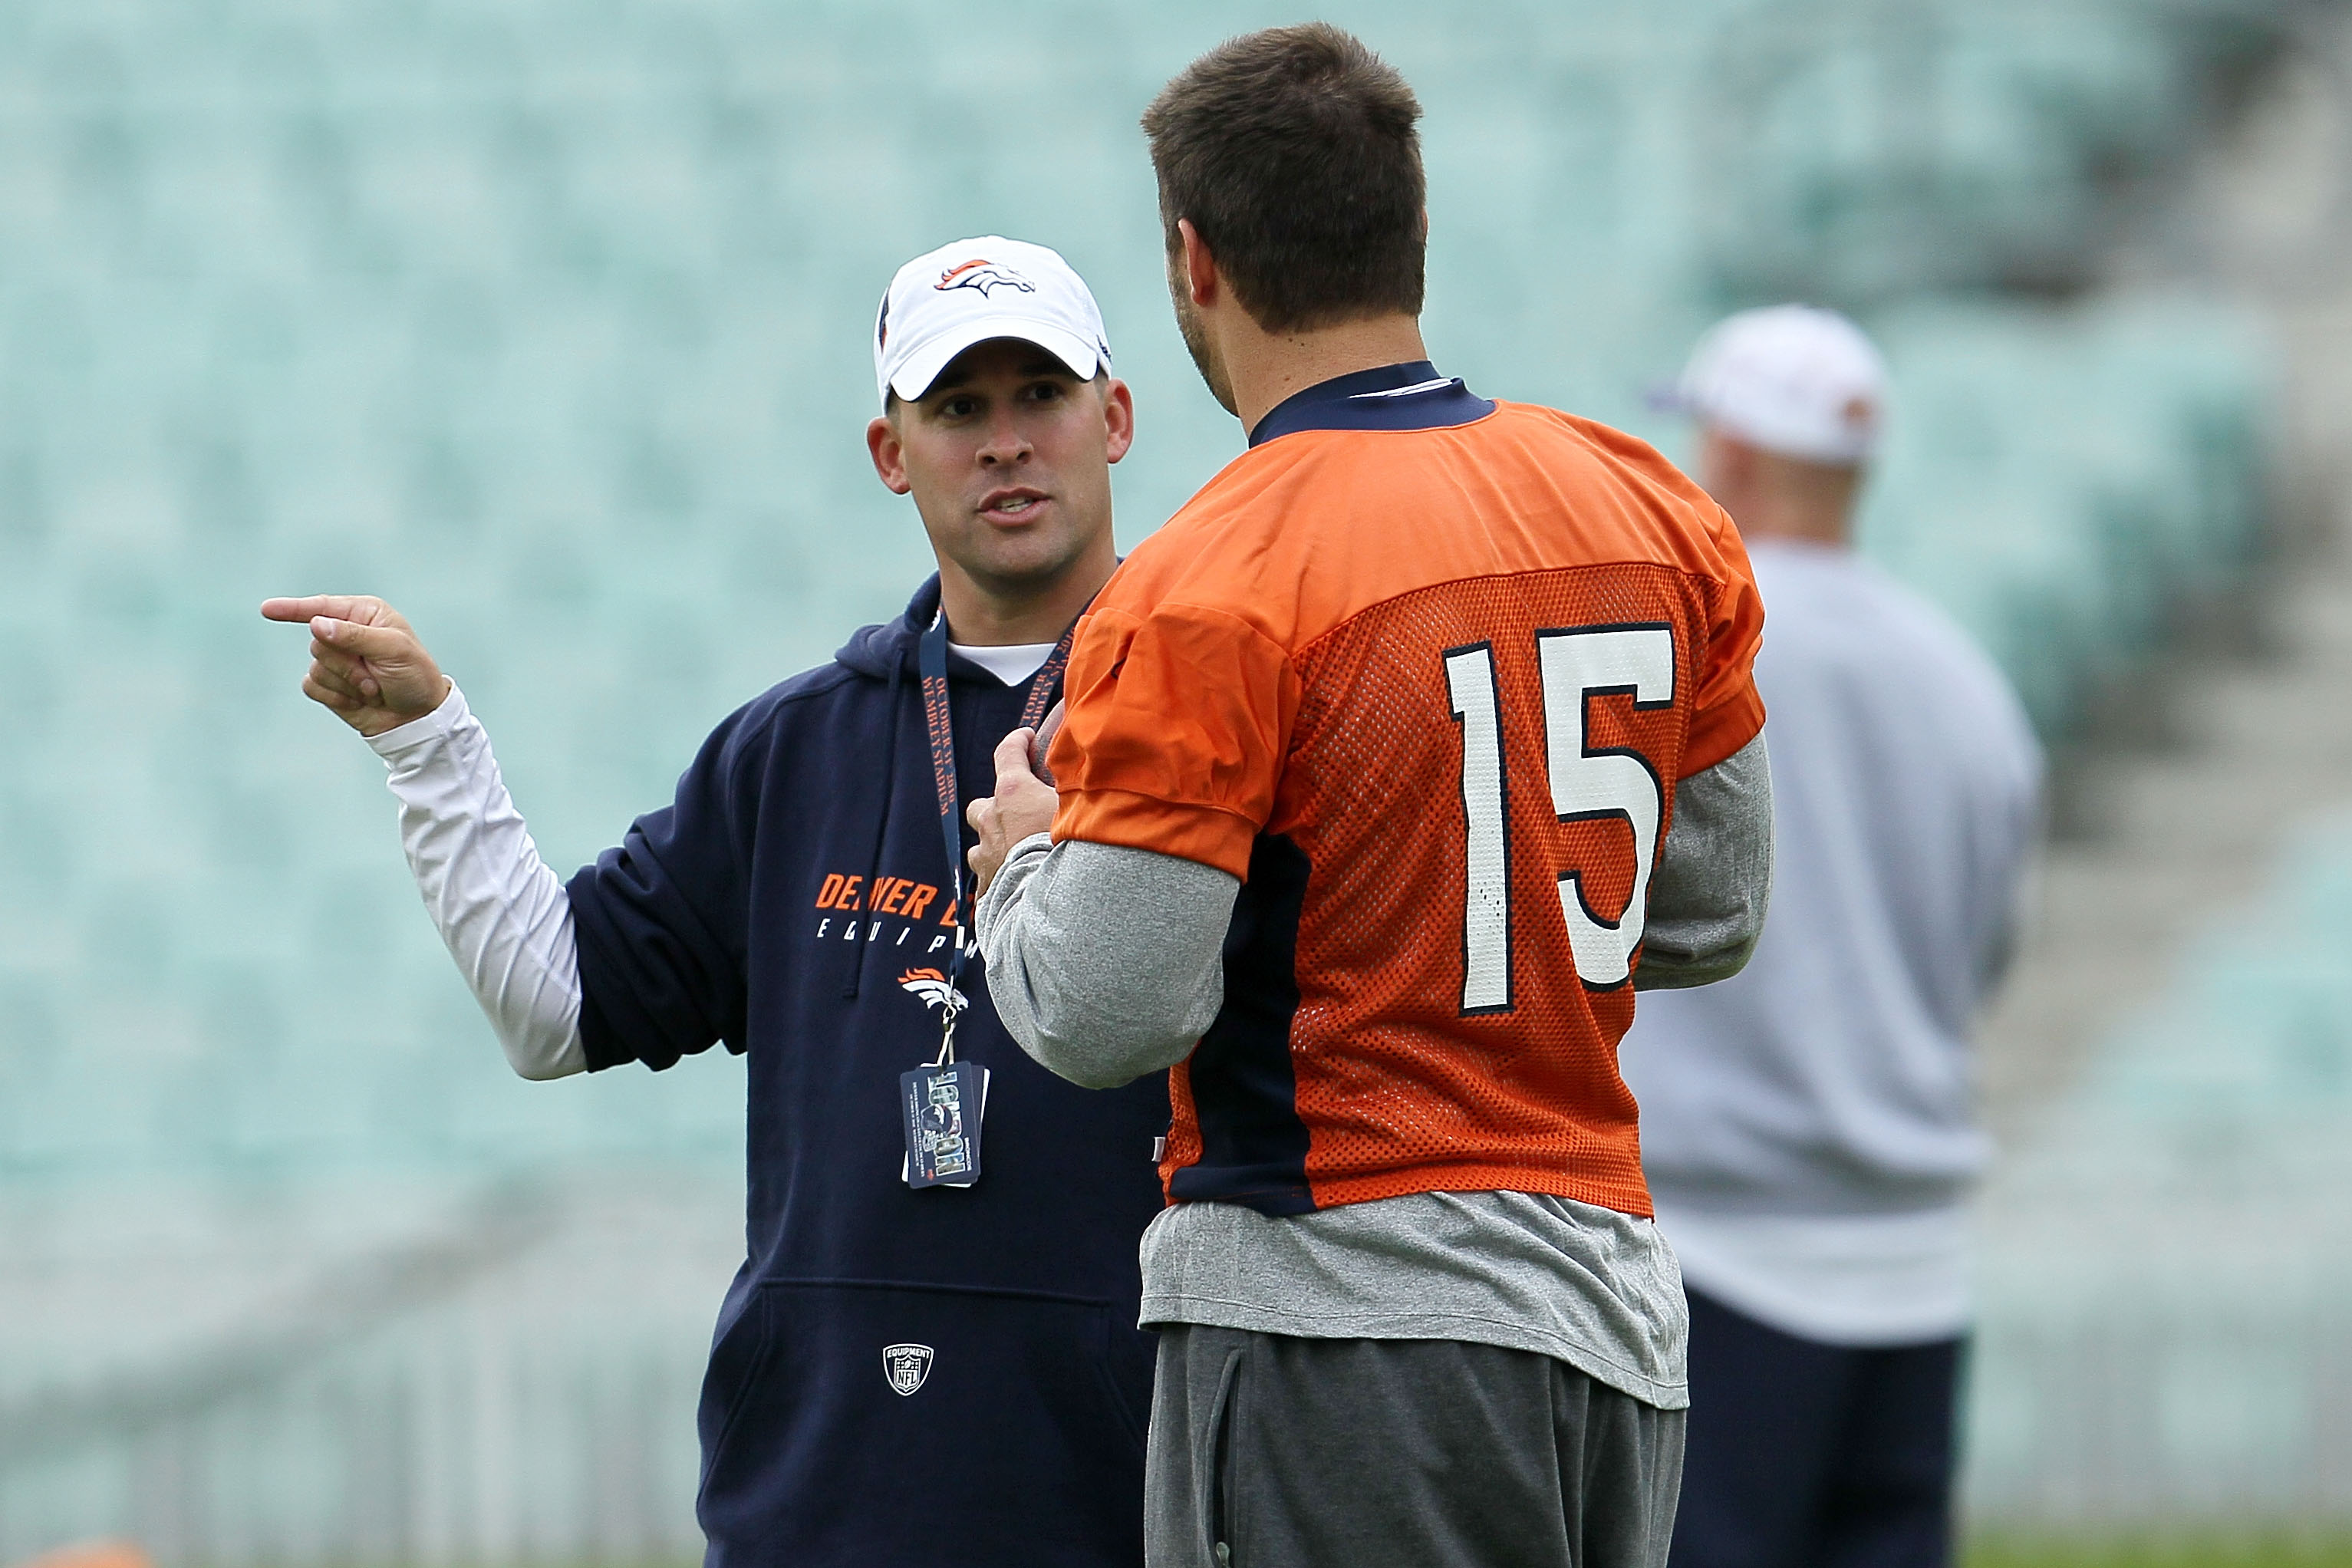 LONDON, ENGLAND - OCTOBER 29:  Head coach of the Denver Broncos Josh McDaniels talks with Tim Tebow #15  during a team training session at The Brit Oval on October 29, 2010 in London, England. The Denver Broncos will play the San Francisco 49ers at Wemble